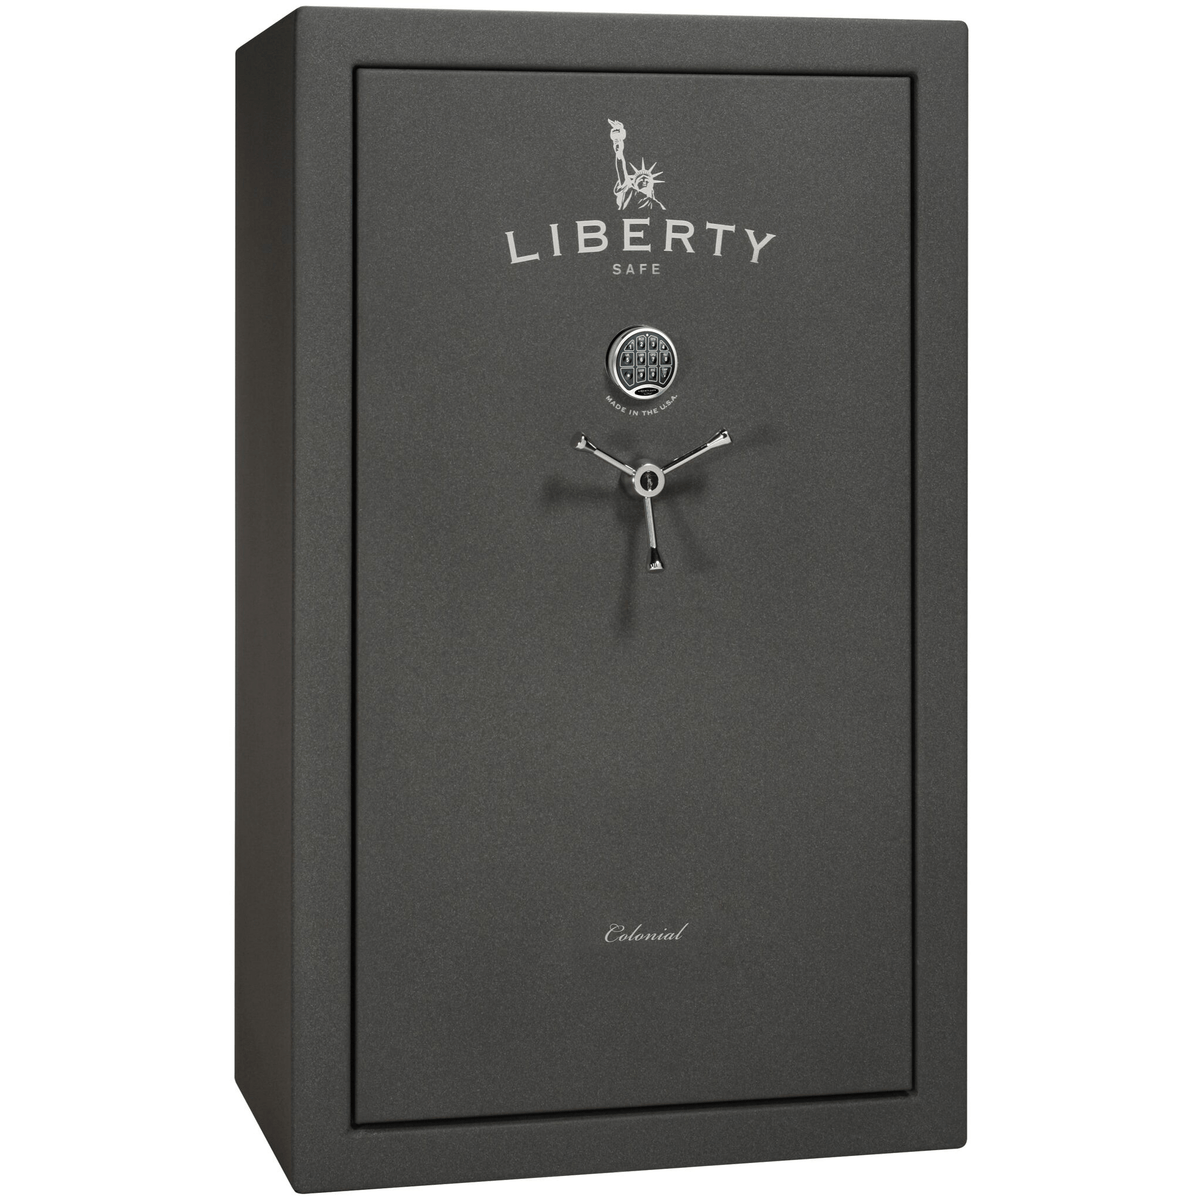 Liberty Colonial 30 Safe in Textured Granite with Chrome Electronic Lock.